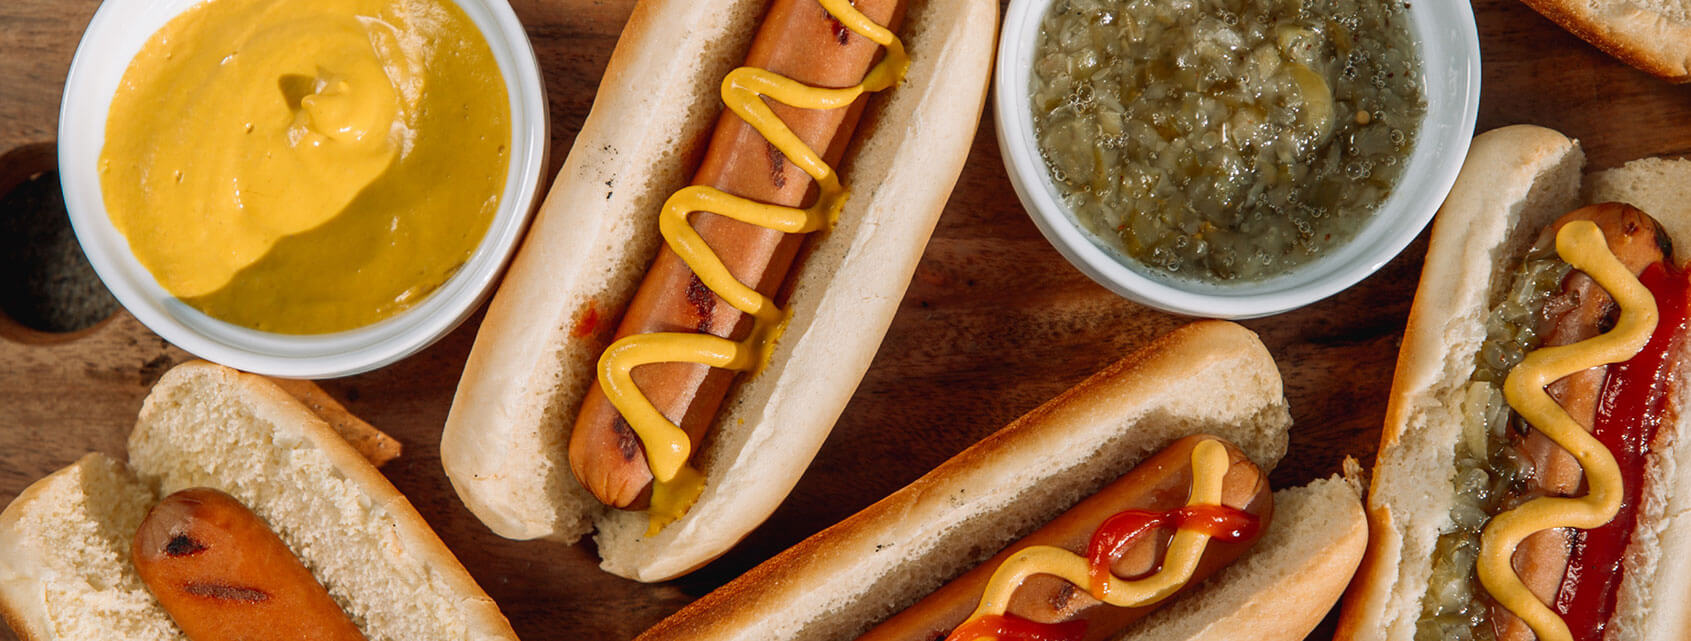 Overheard shot of grilled hot dogs dressed up with ketchup, mustard, and relish next to small bowls of mustard and relish.